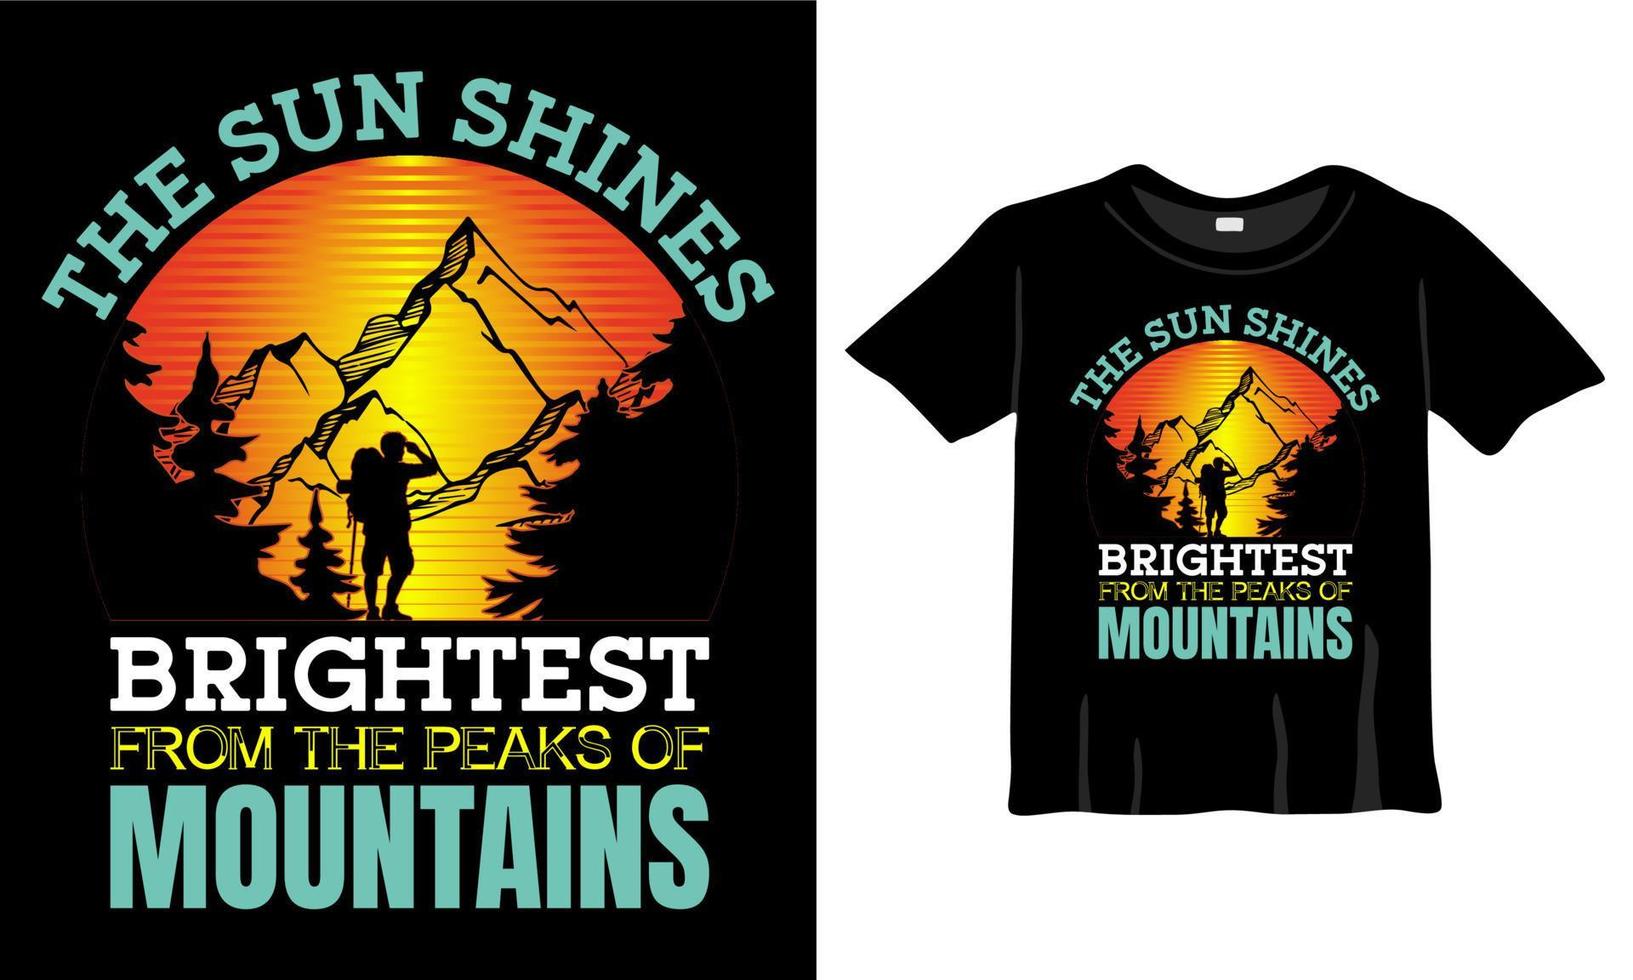 The sun shines brightest from the peaks mountains t-shirt. Best Hiking t-shirt, mountains t-shirt. Best hiking Shirt vector ever.